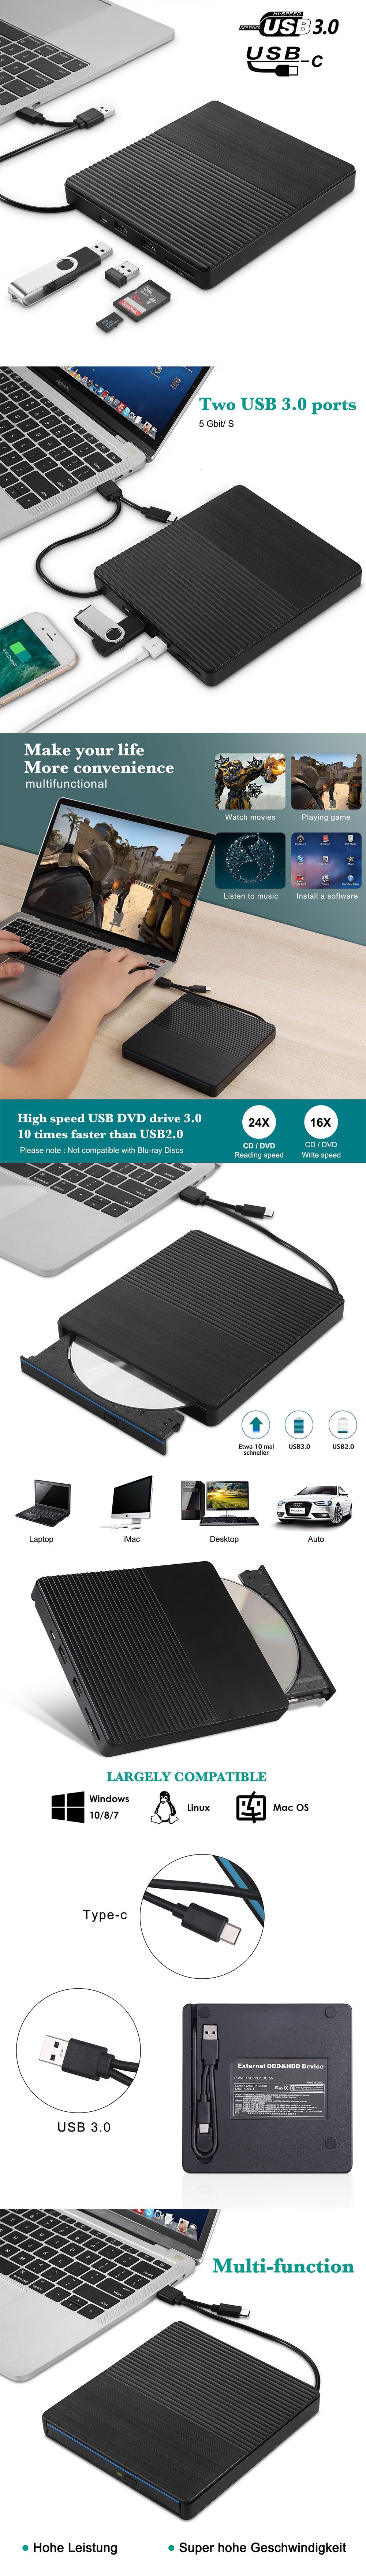 USB30-Type-C-External-CD-Burner-CDDVD-Player-Optical-Drive-Multi-function-High-Speed-for-PC-Laptop-1598456